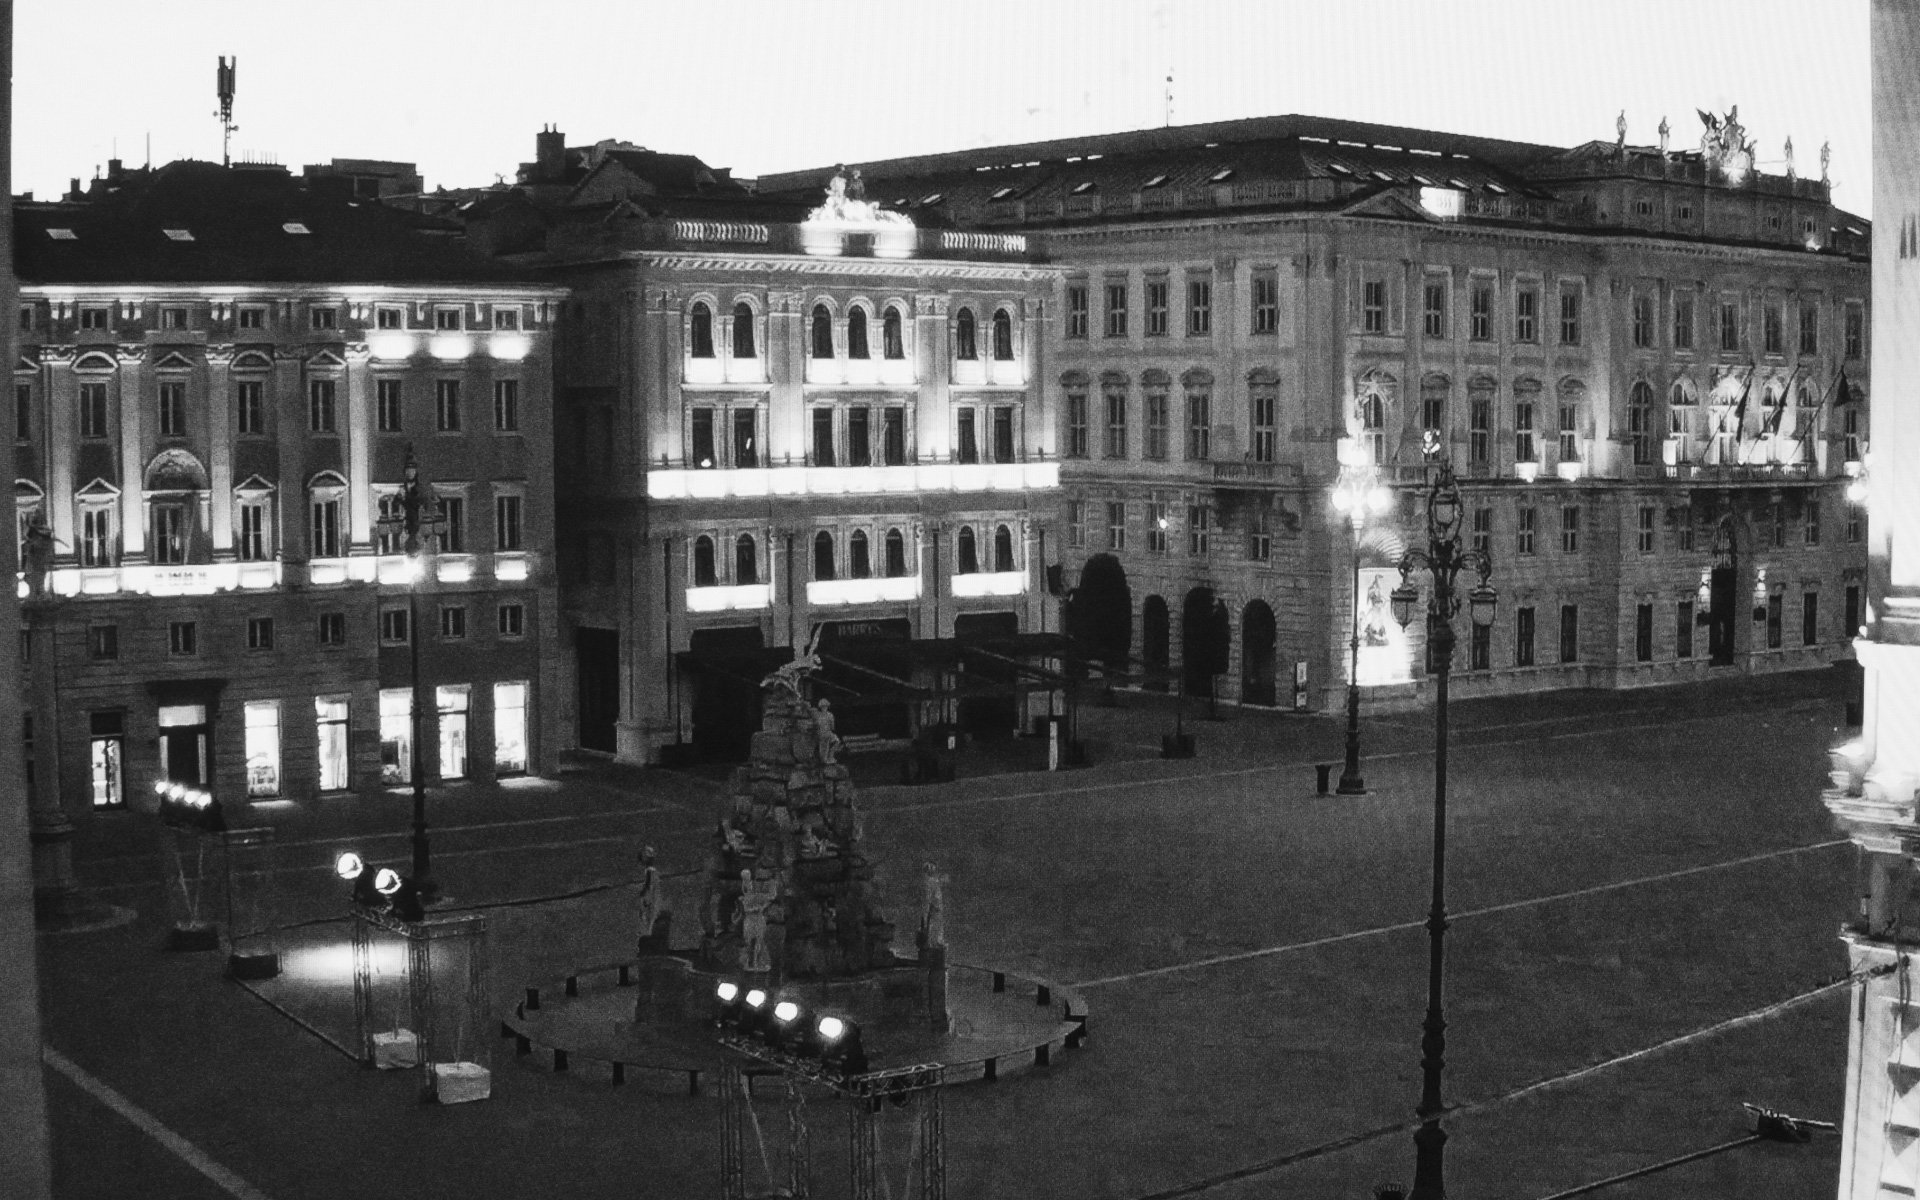 Trieste, Unità d’Italia square - The largest square facing the sea in Europe is depopulated. March 25. 2020